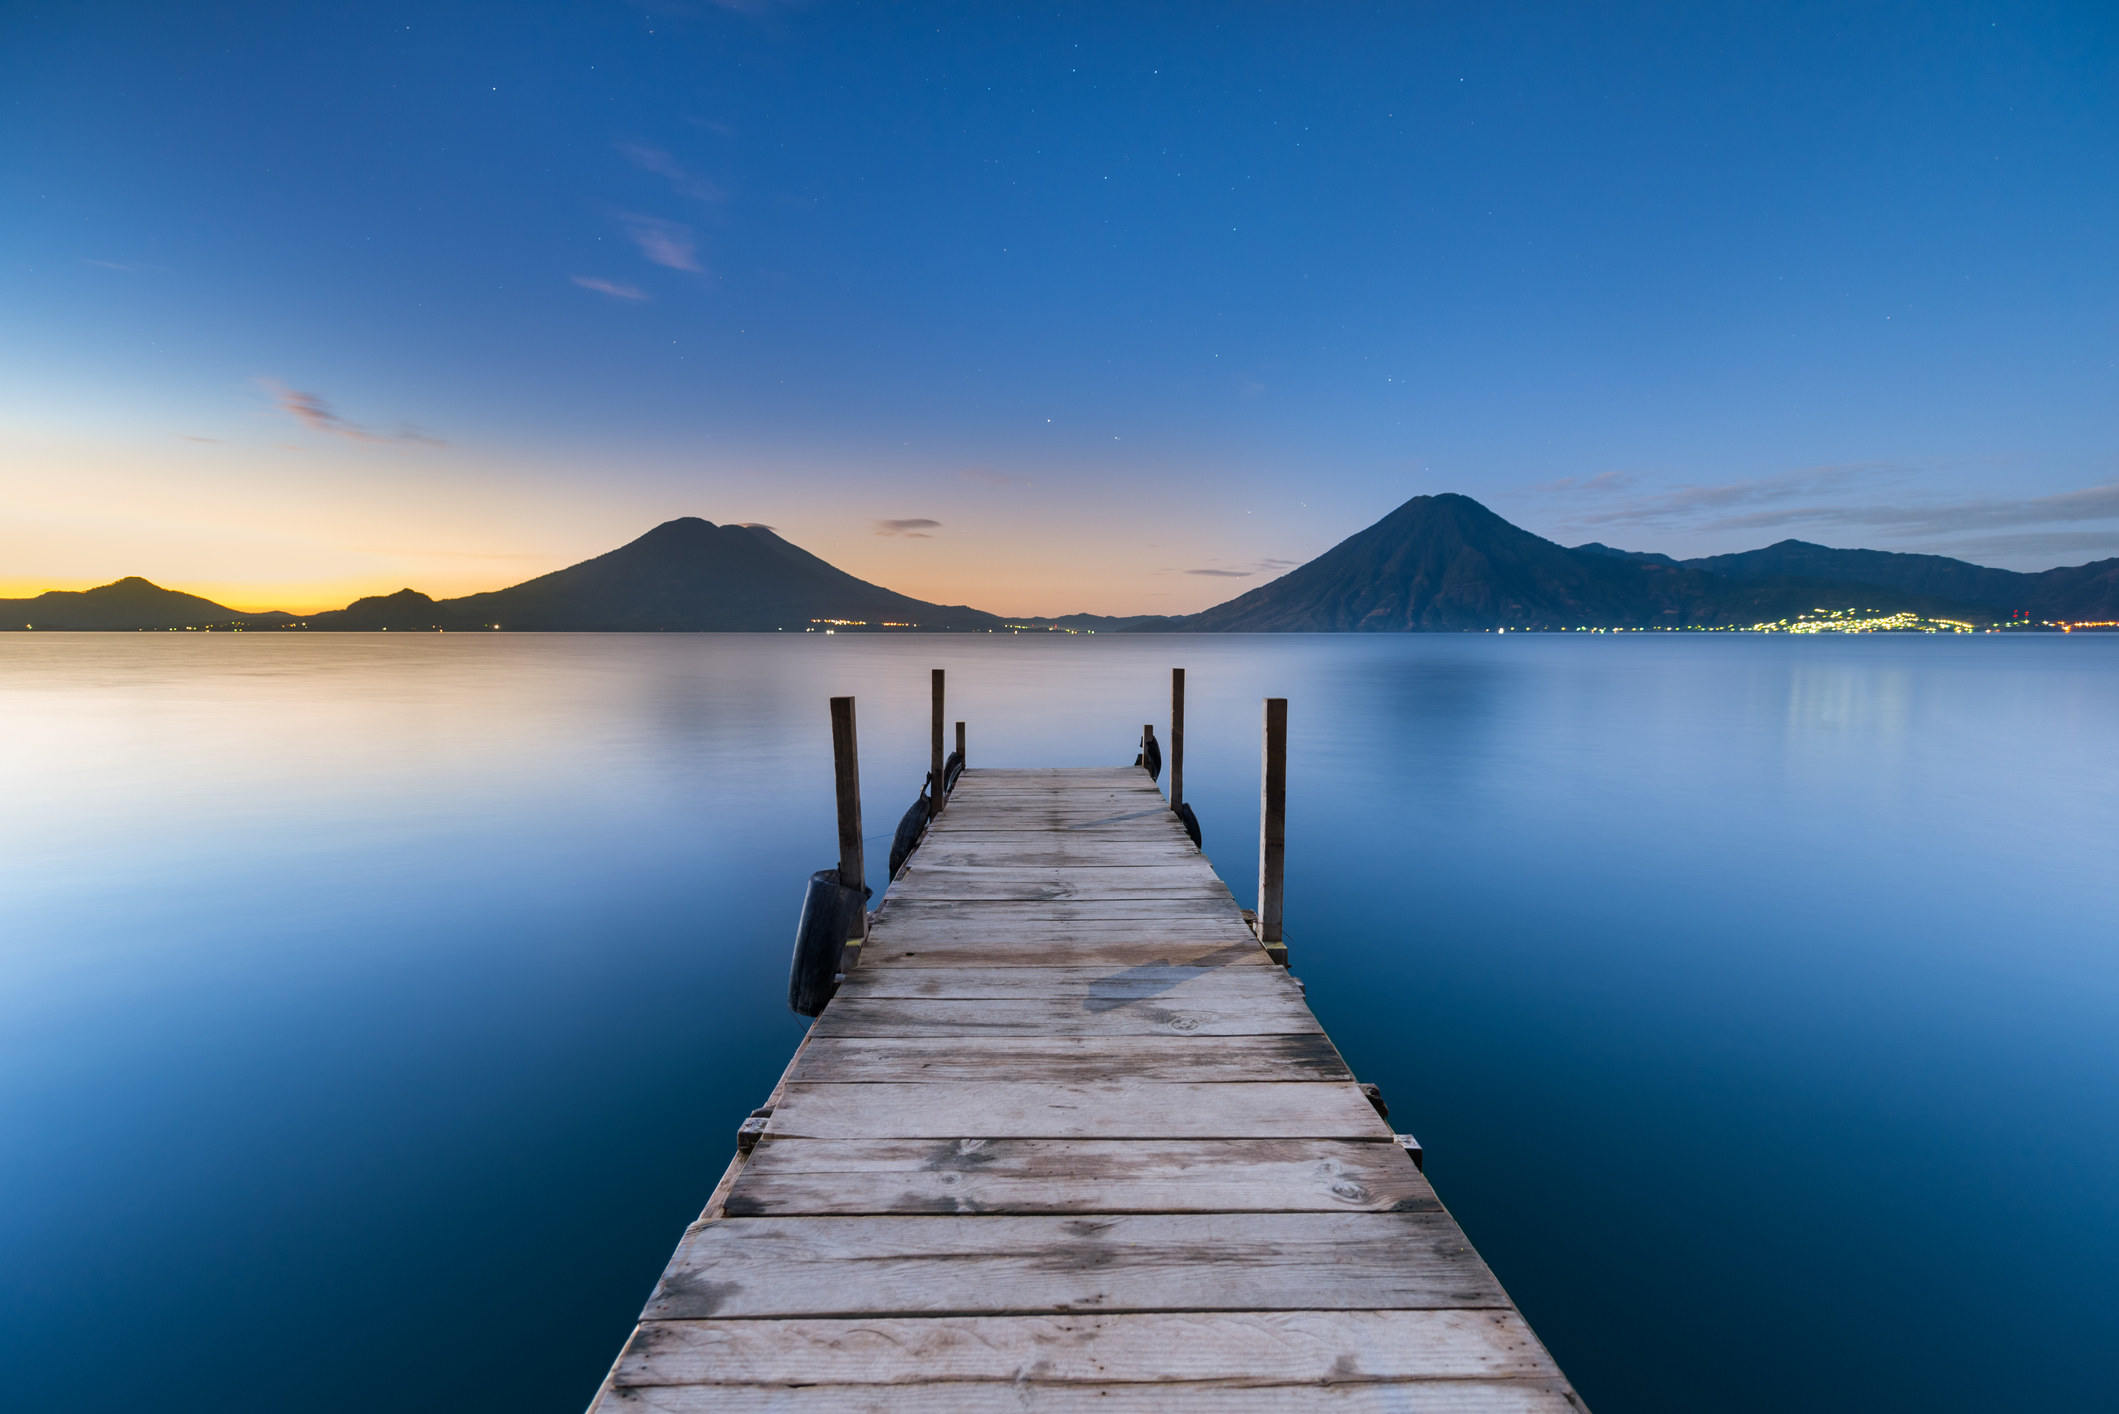 A dock into calm lake with volcanoes in the distance